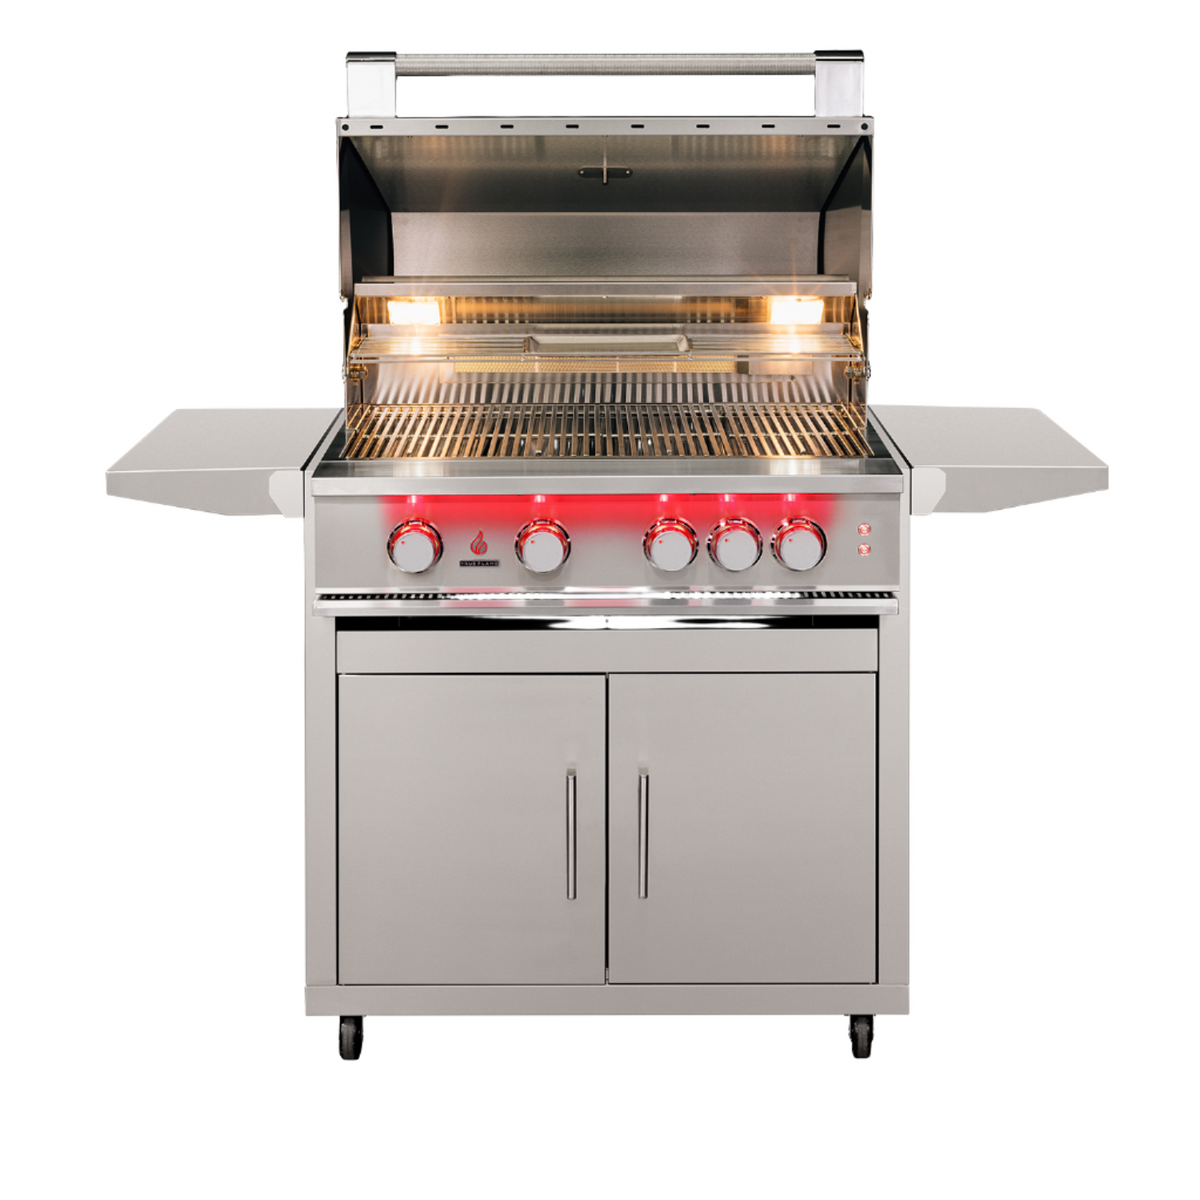 TrueFlame 40 Inch Grill - Freestanding